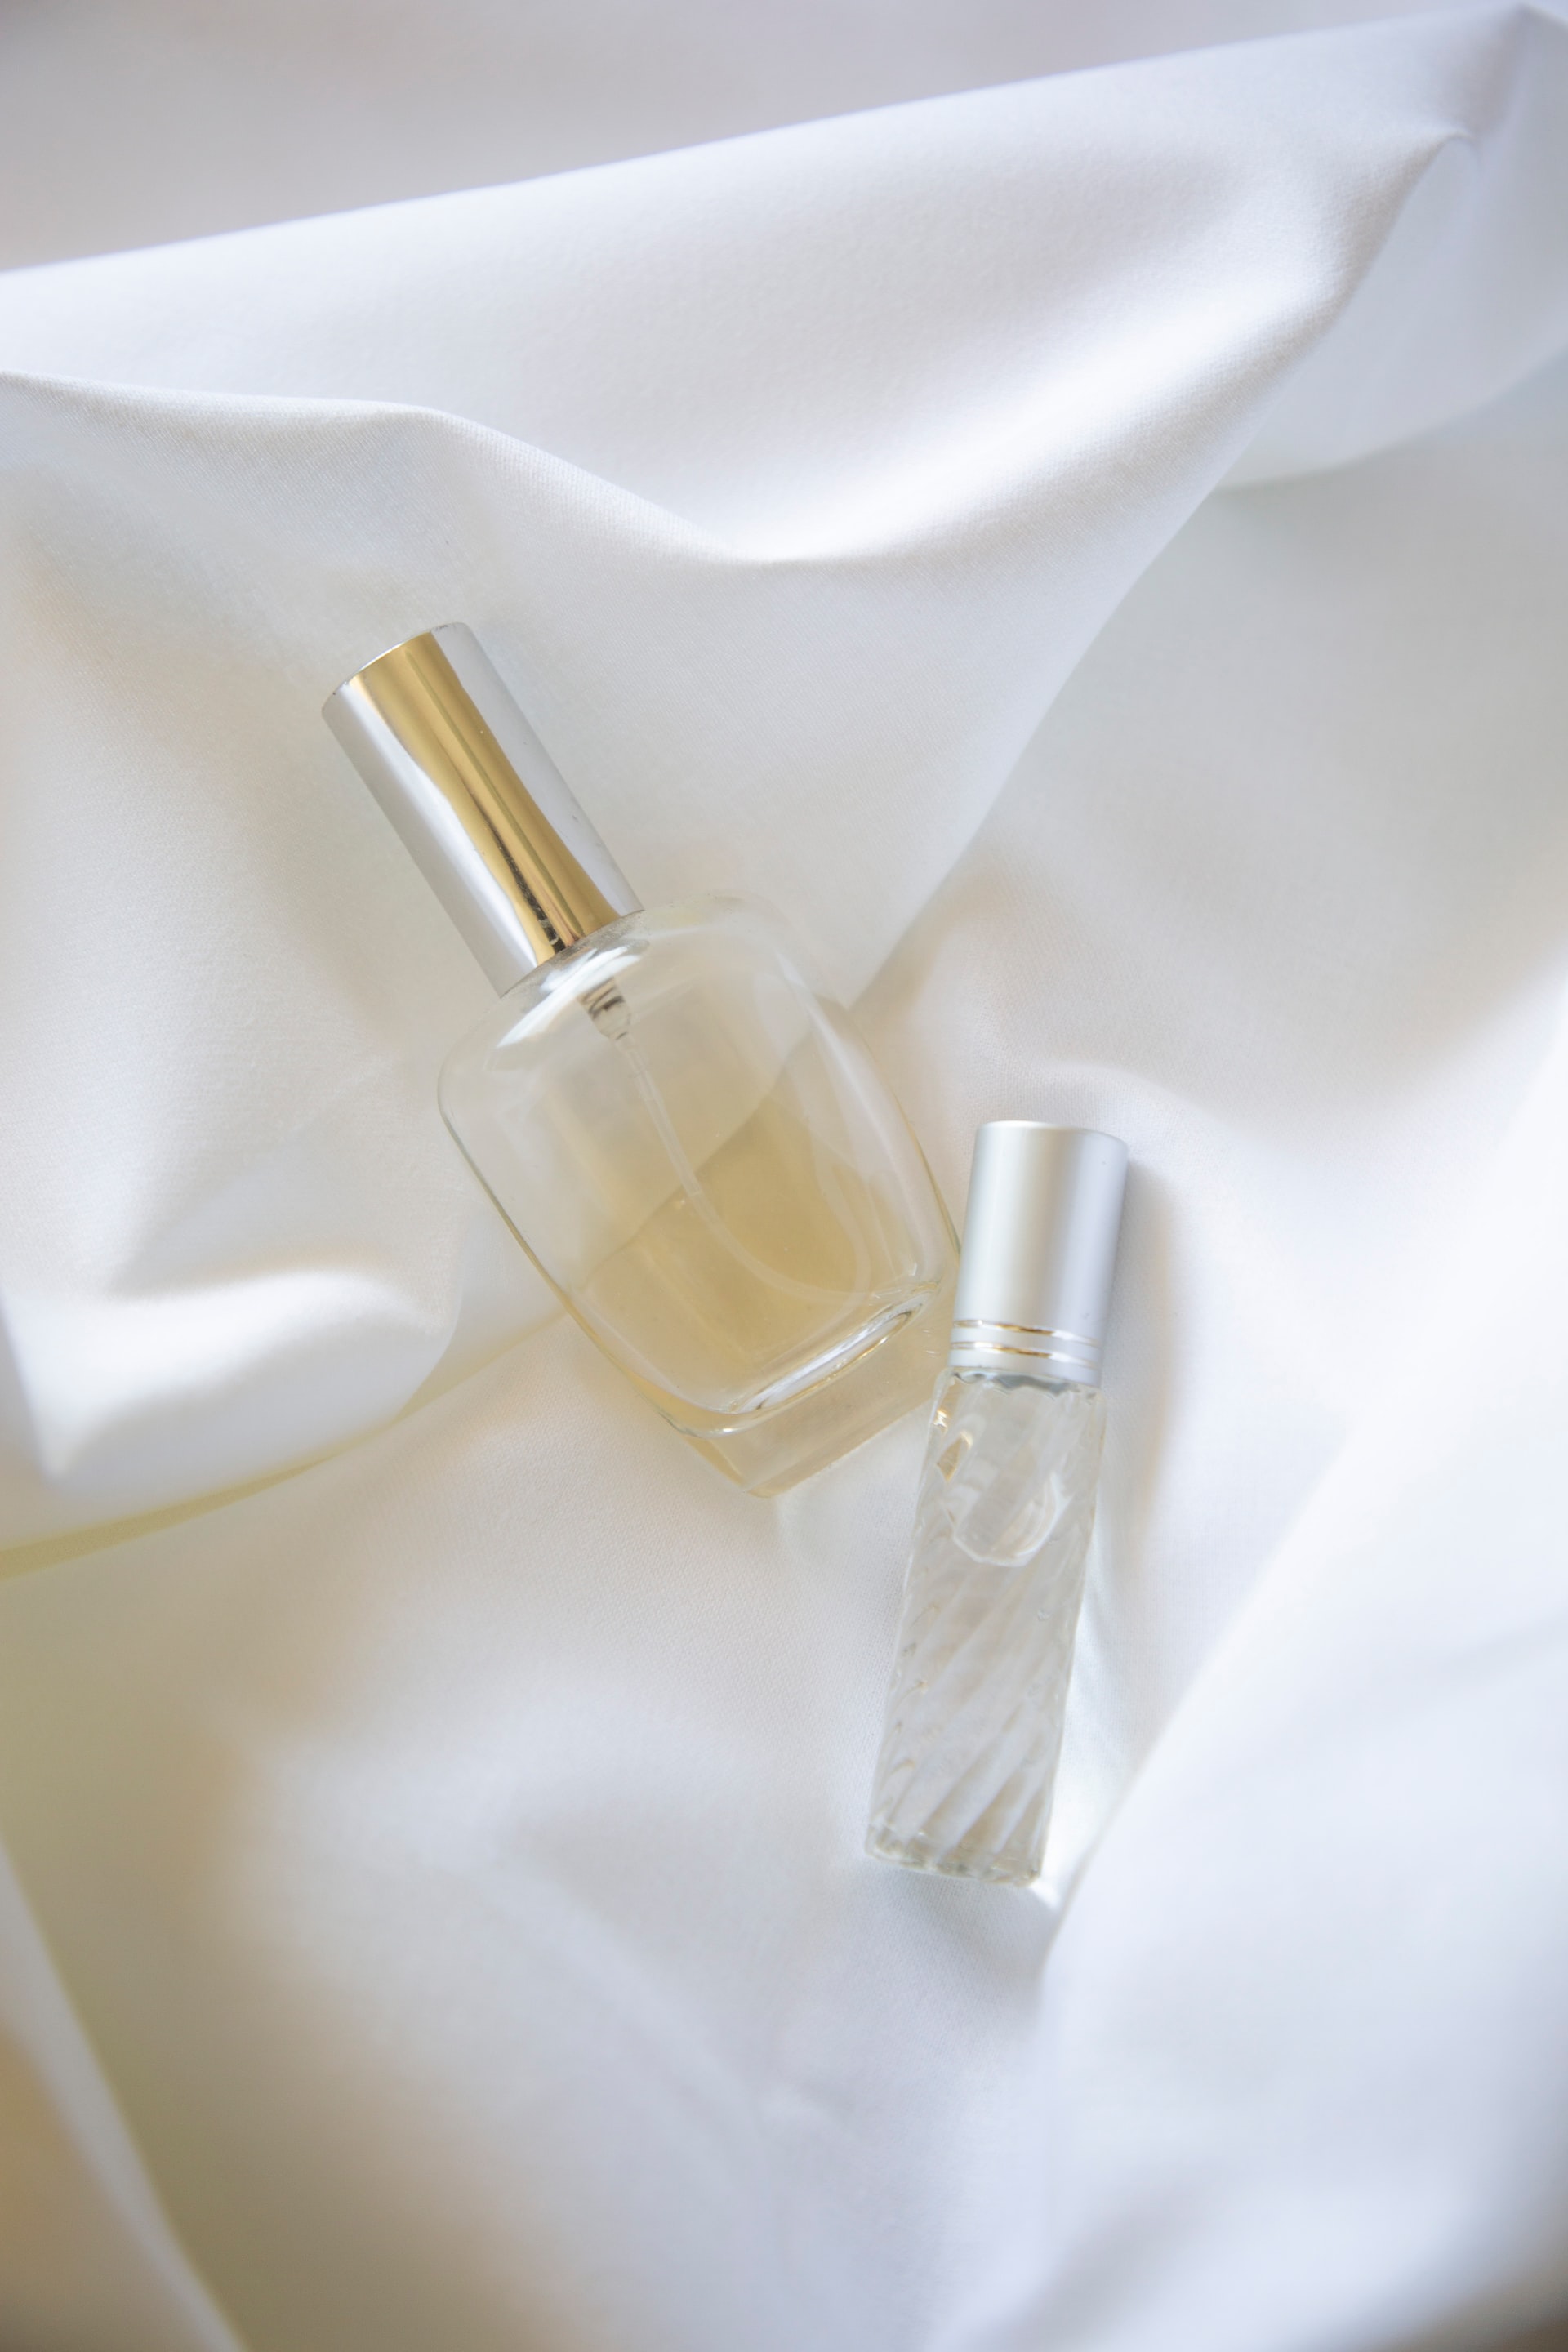 How Long Can You Use a 100ml Perfume Bottle?